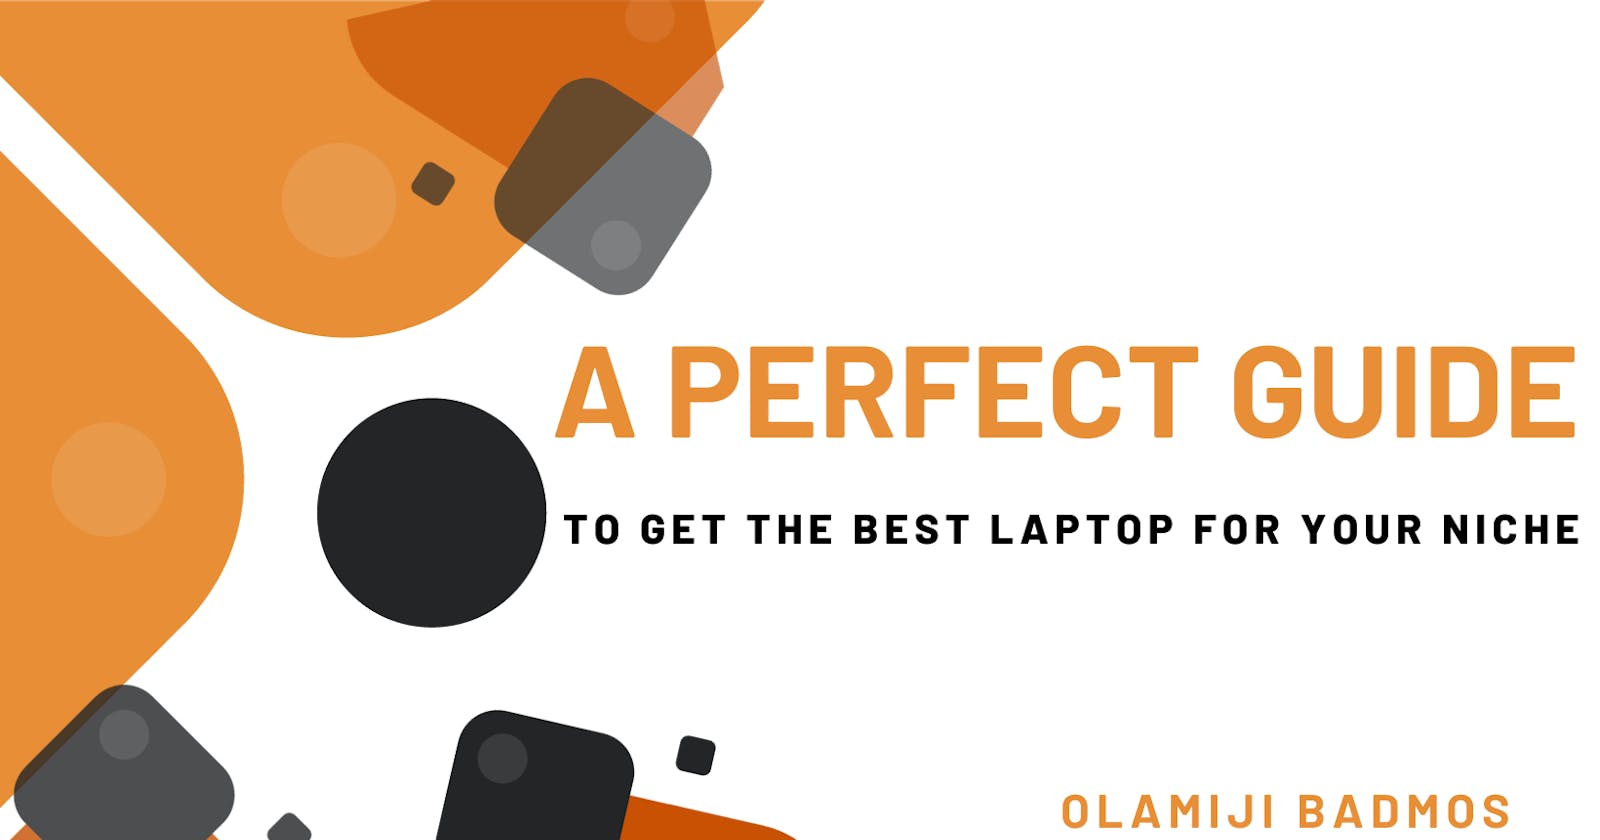 A Perfect Guide To Buying The Best Laptop For Your Niche